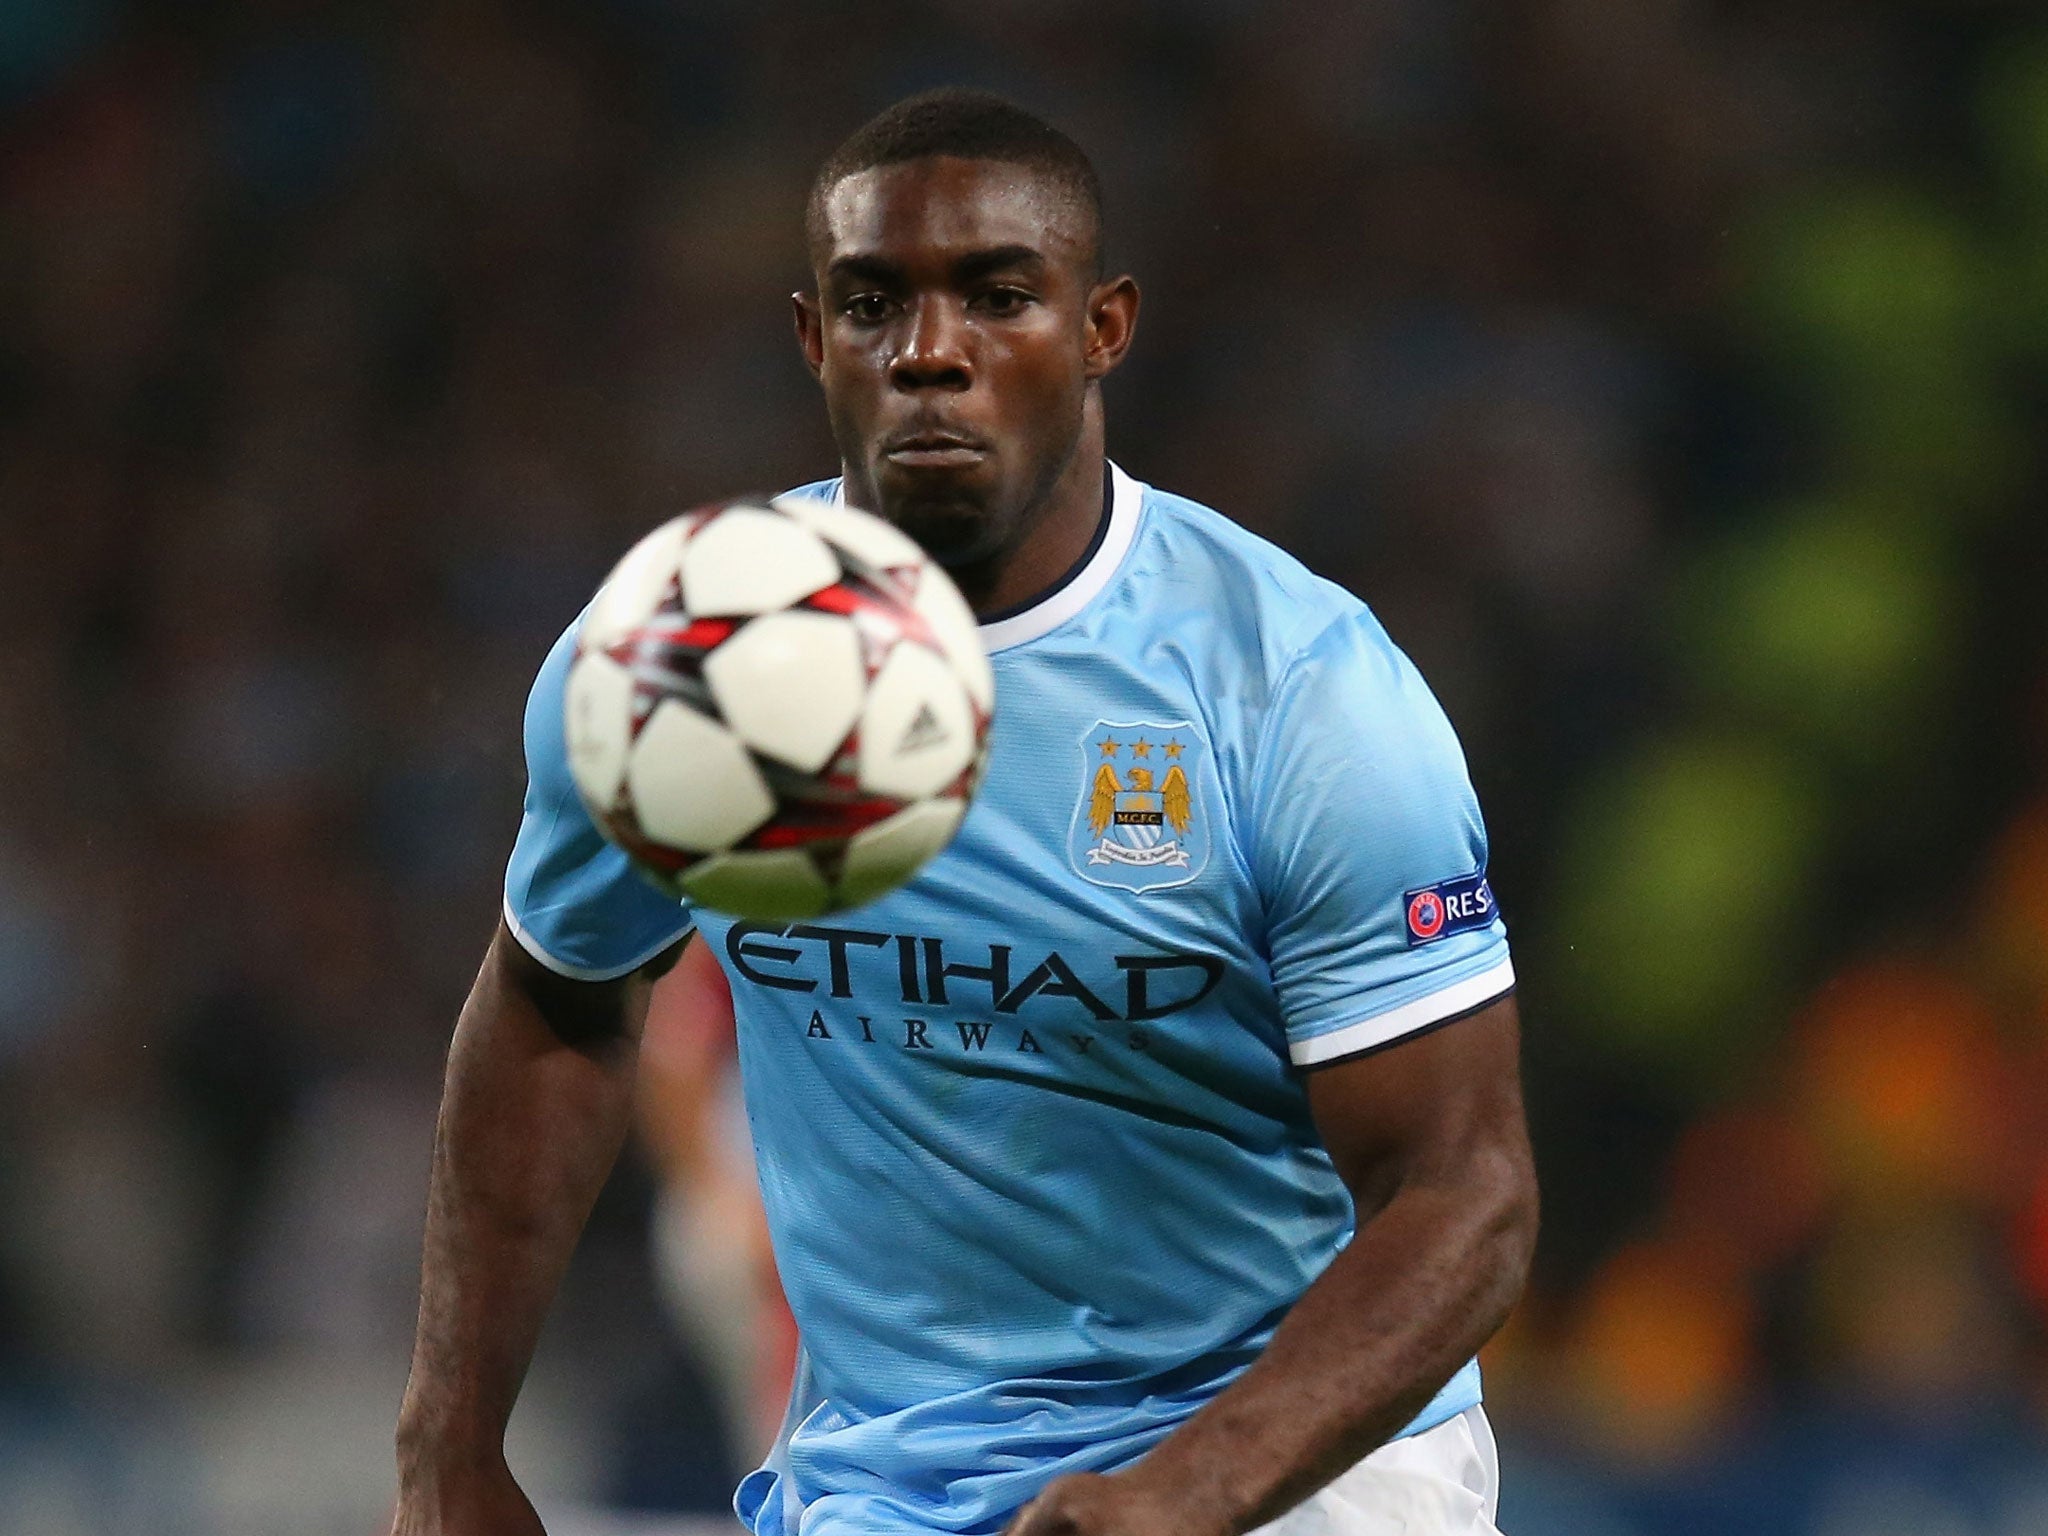 Liverpool bound? Micah Richards is one English player who may leave City